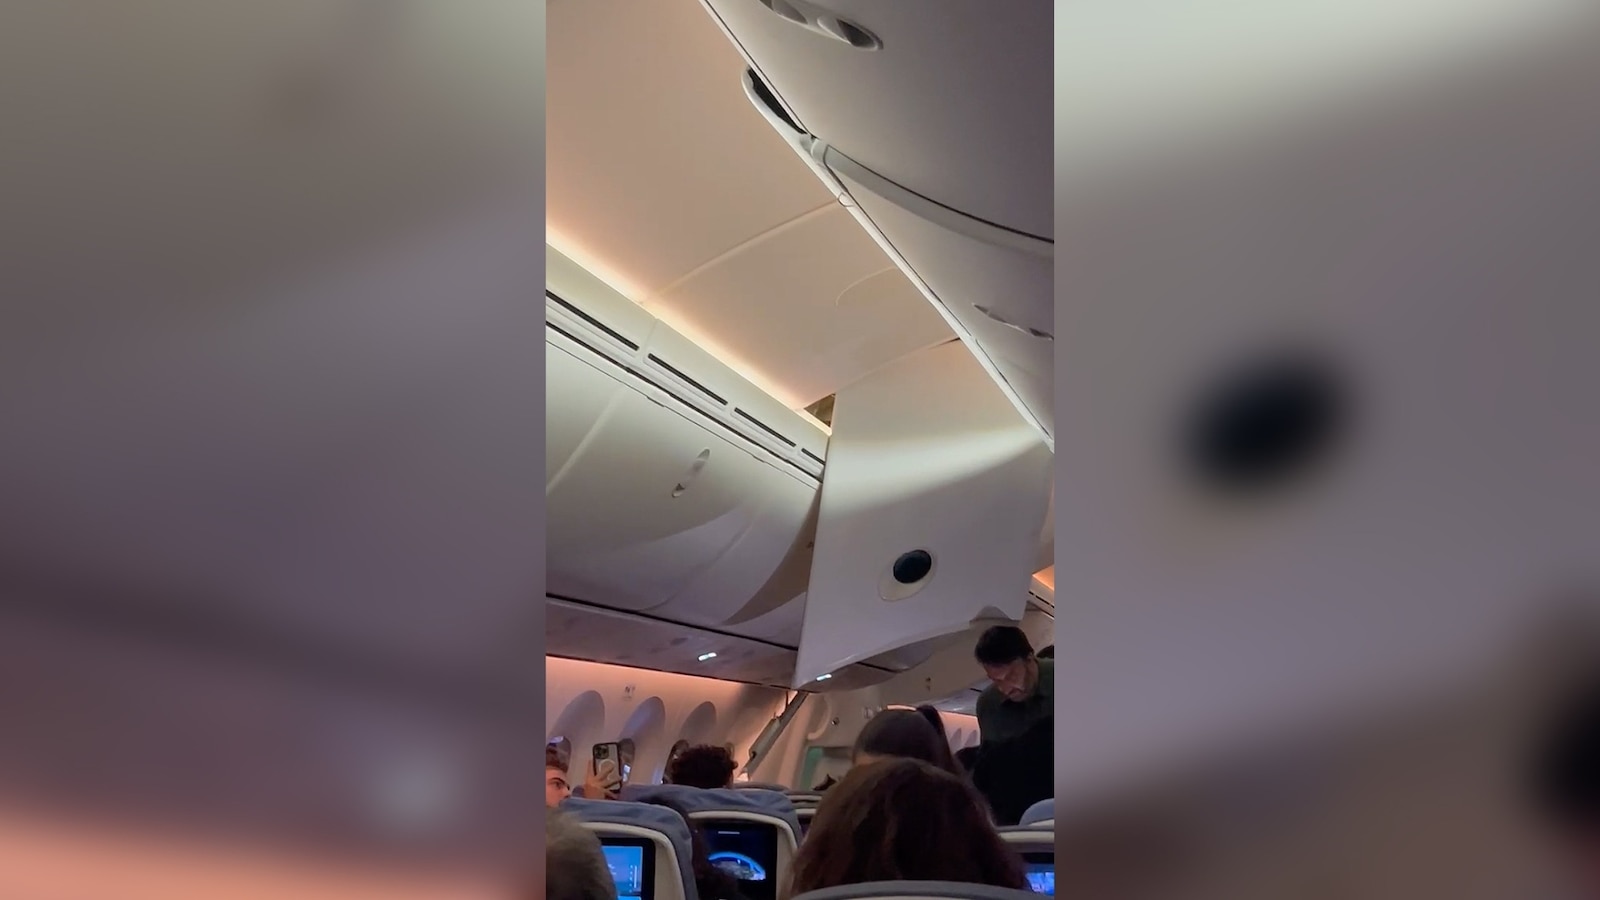 40 people injured after Air Europa flight experiences heavy turbulence, diverted to Brazil